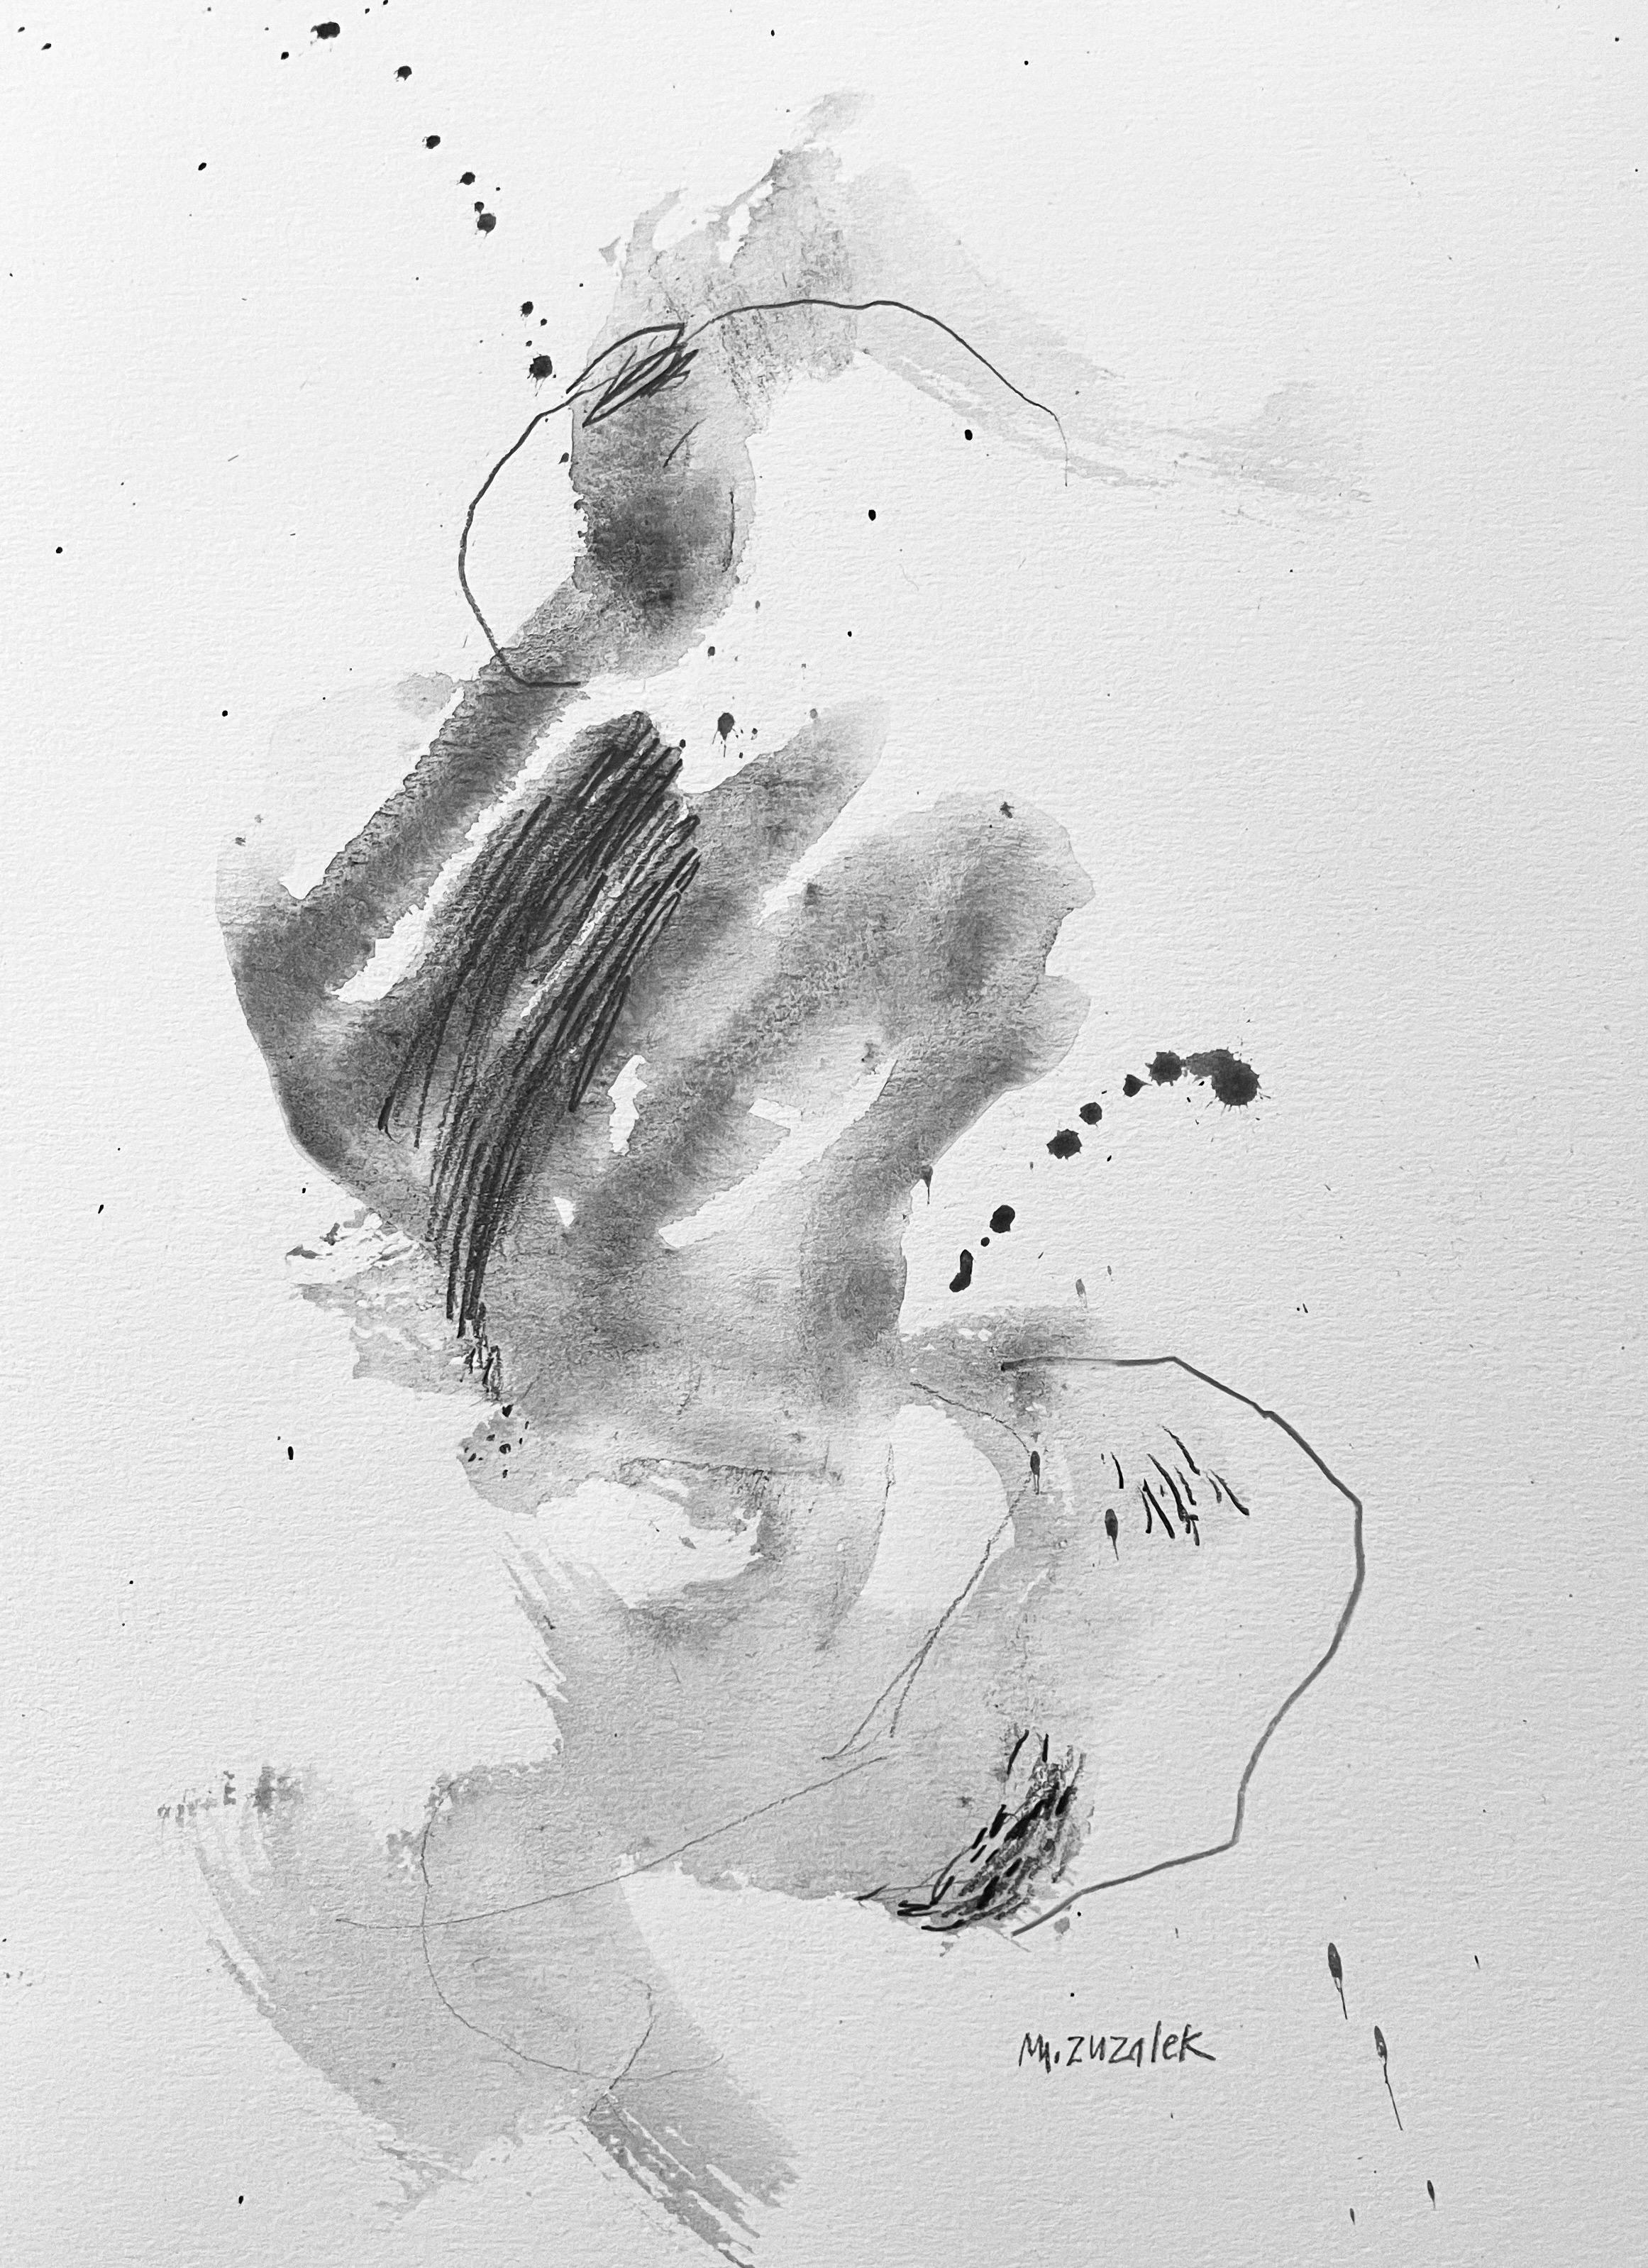 Michele Zuzalek Abstract Drawing - Synesthesia original drawing on paper